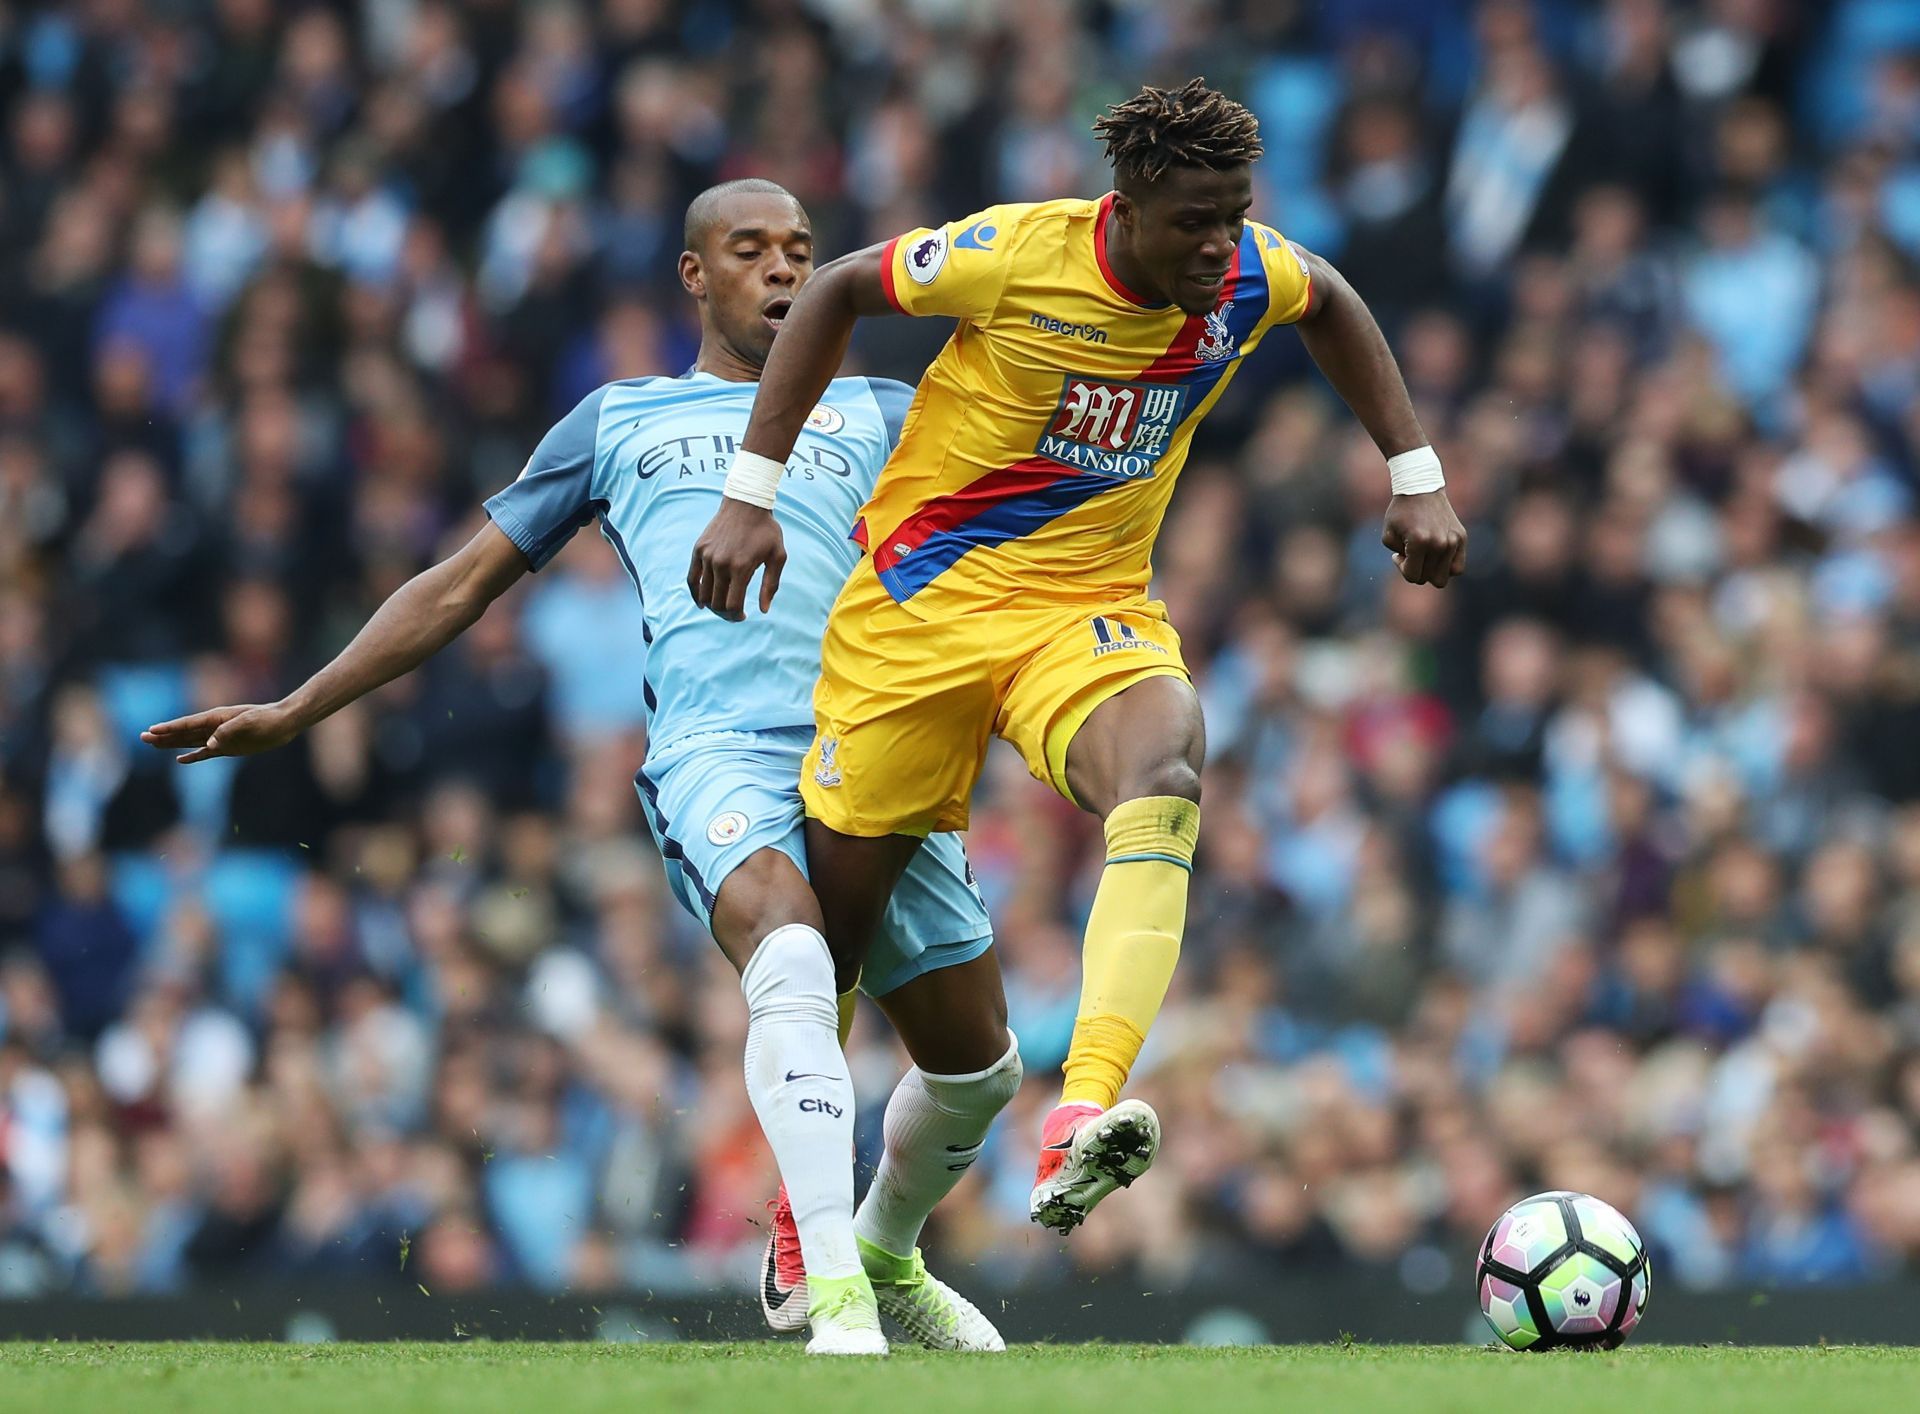 Wilfried Zaha has been one of the most fouled players in the Premier League this season